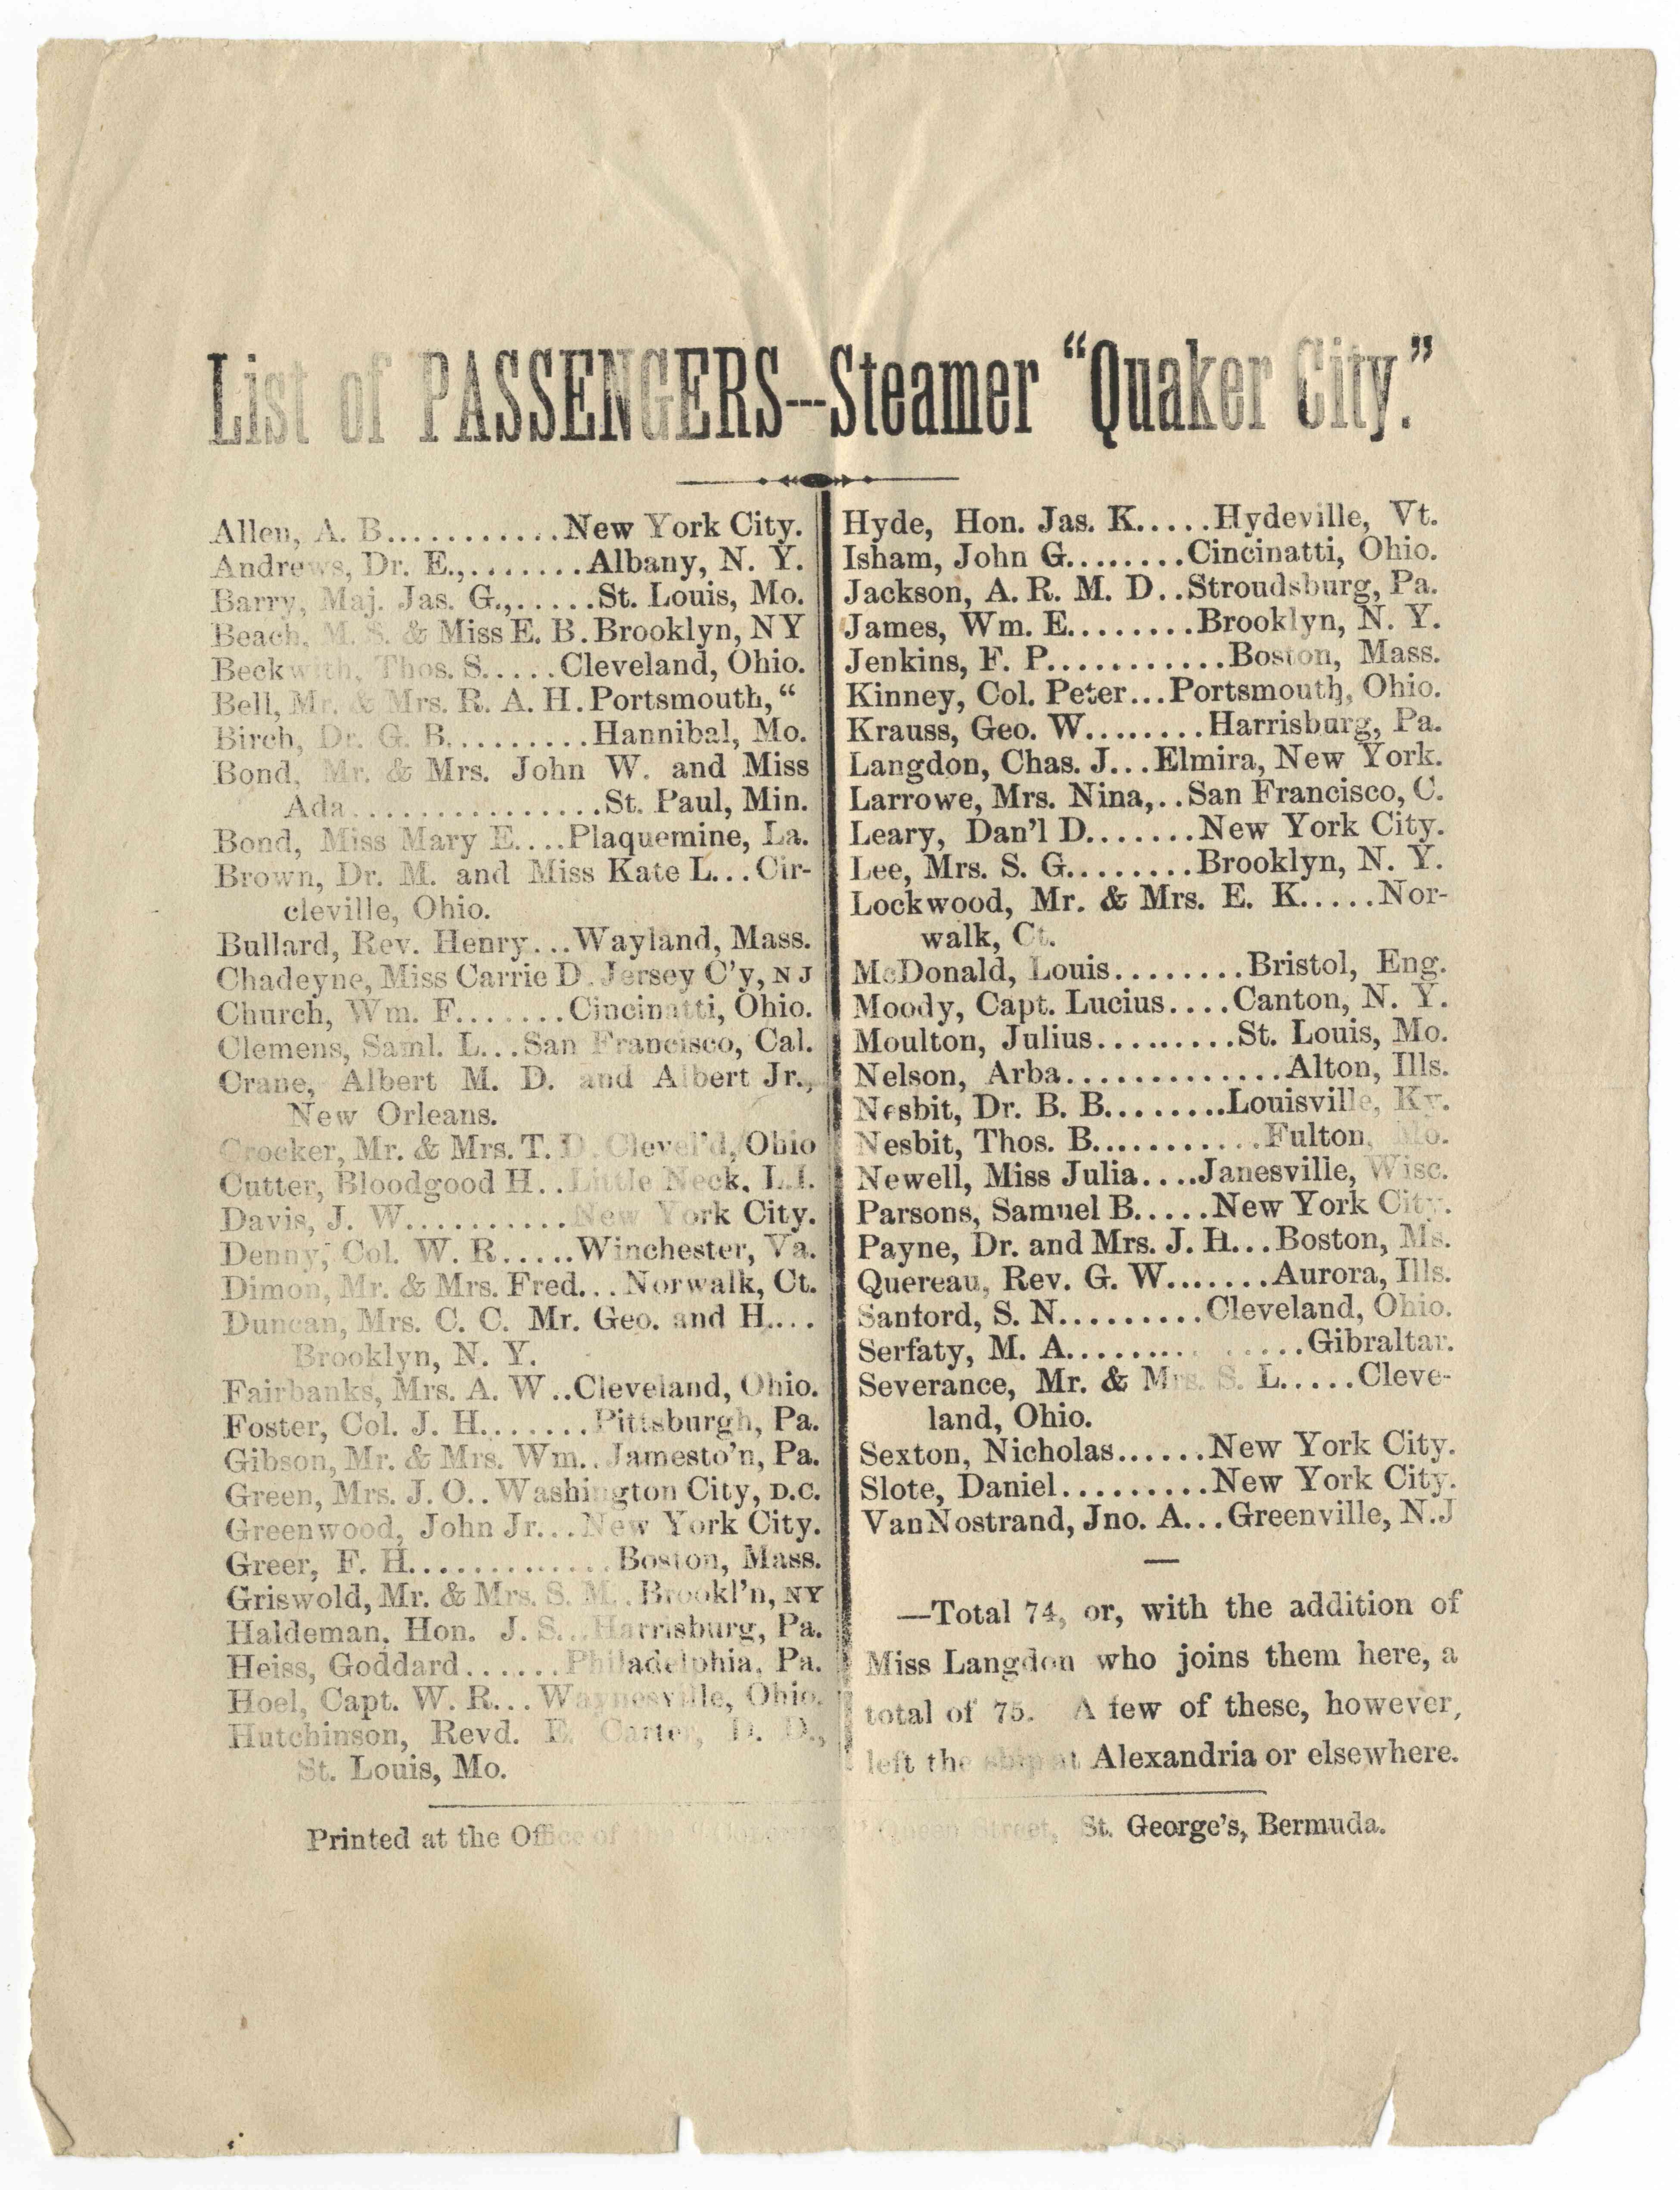 A Rare List of the Passengers of the "Quaker City" Excursion to the Holy Land